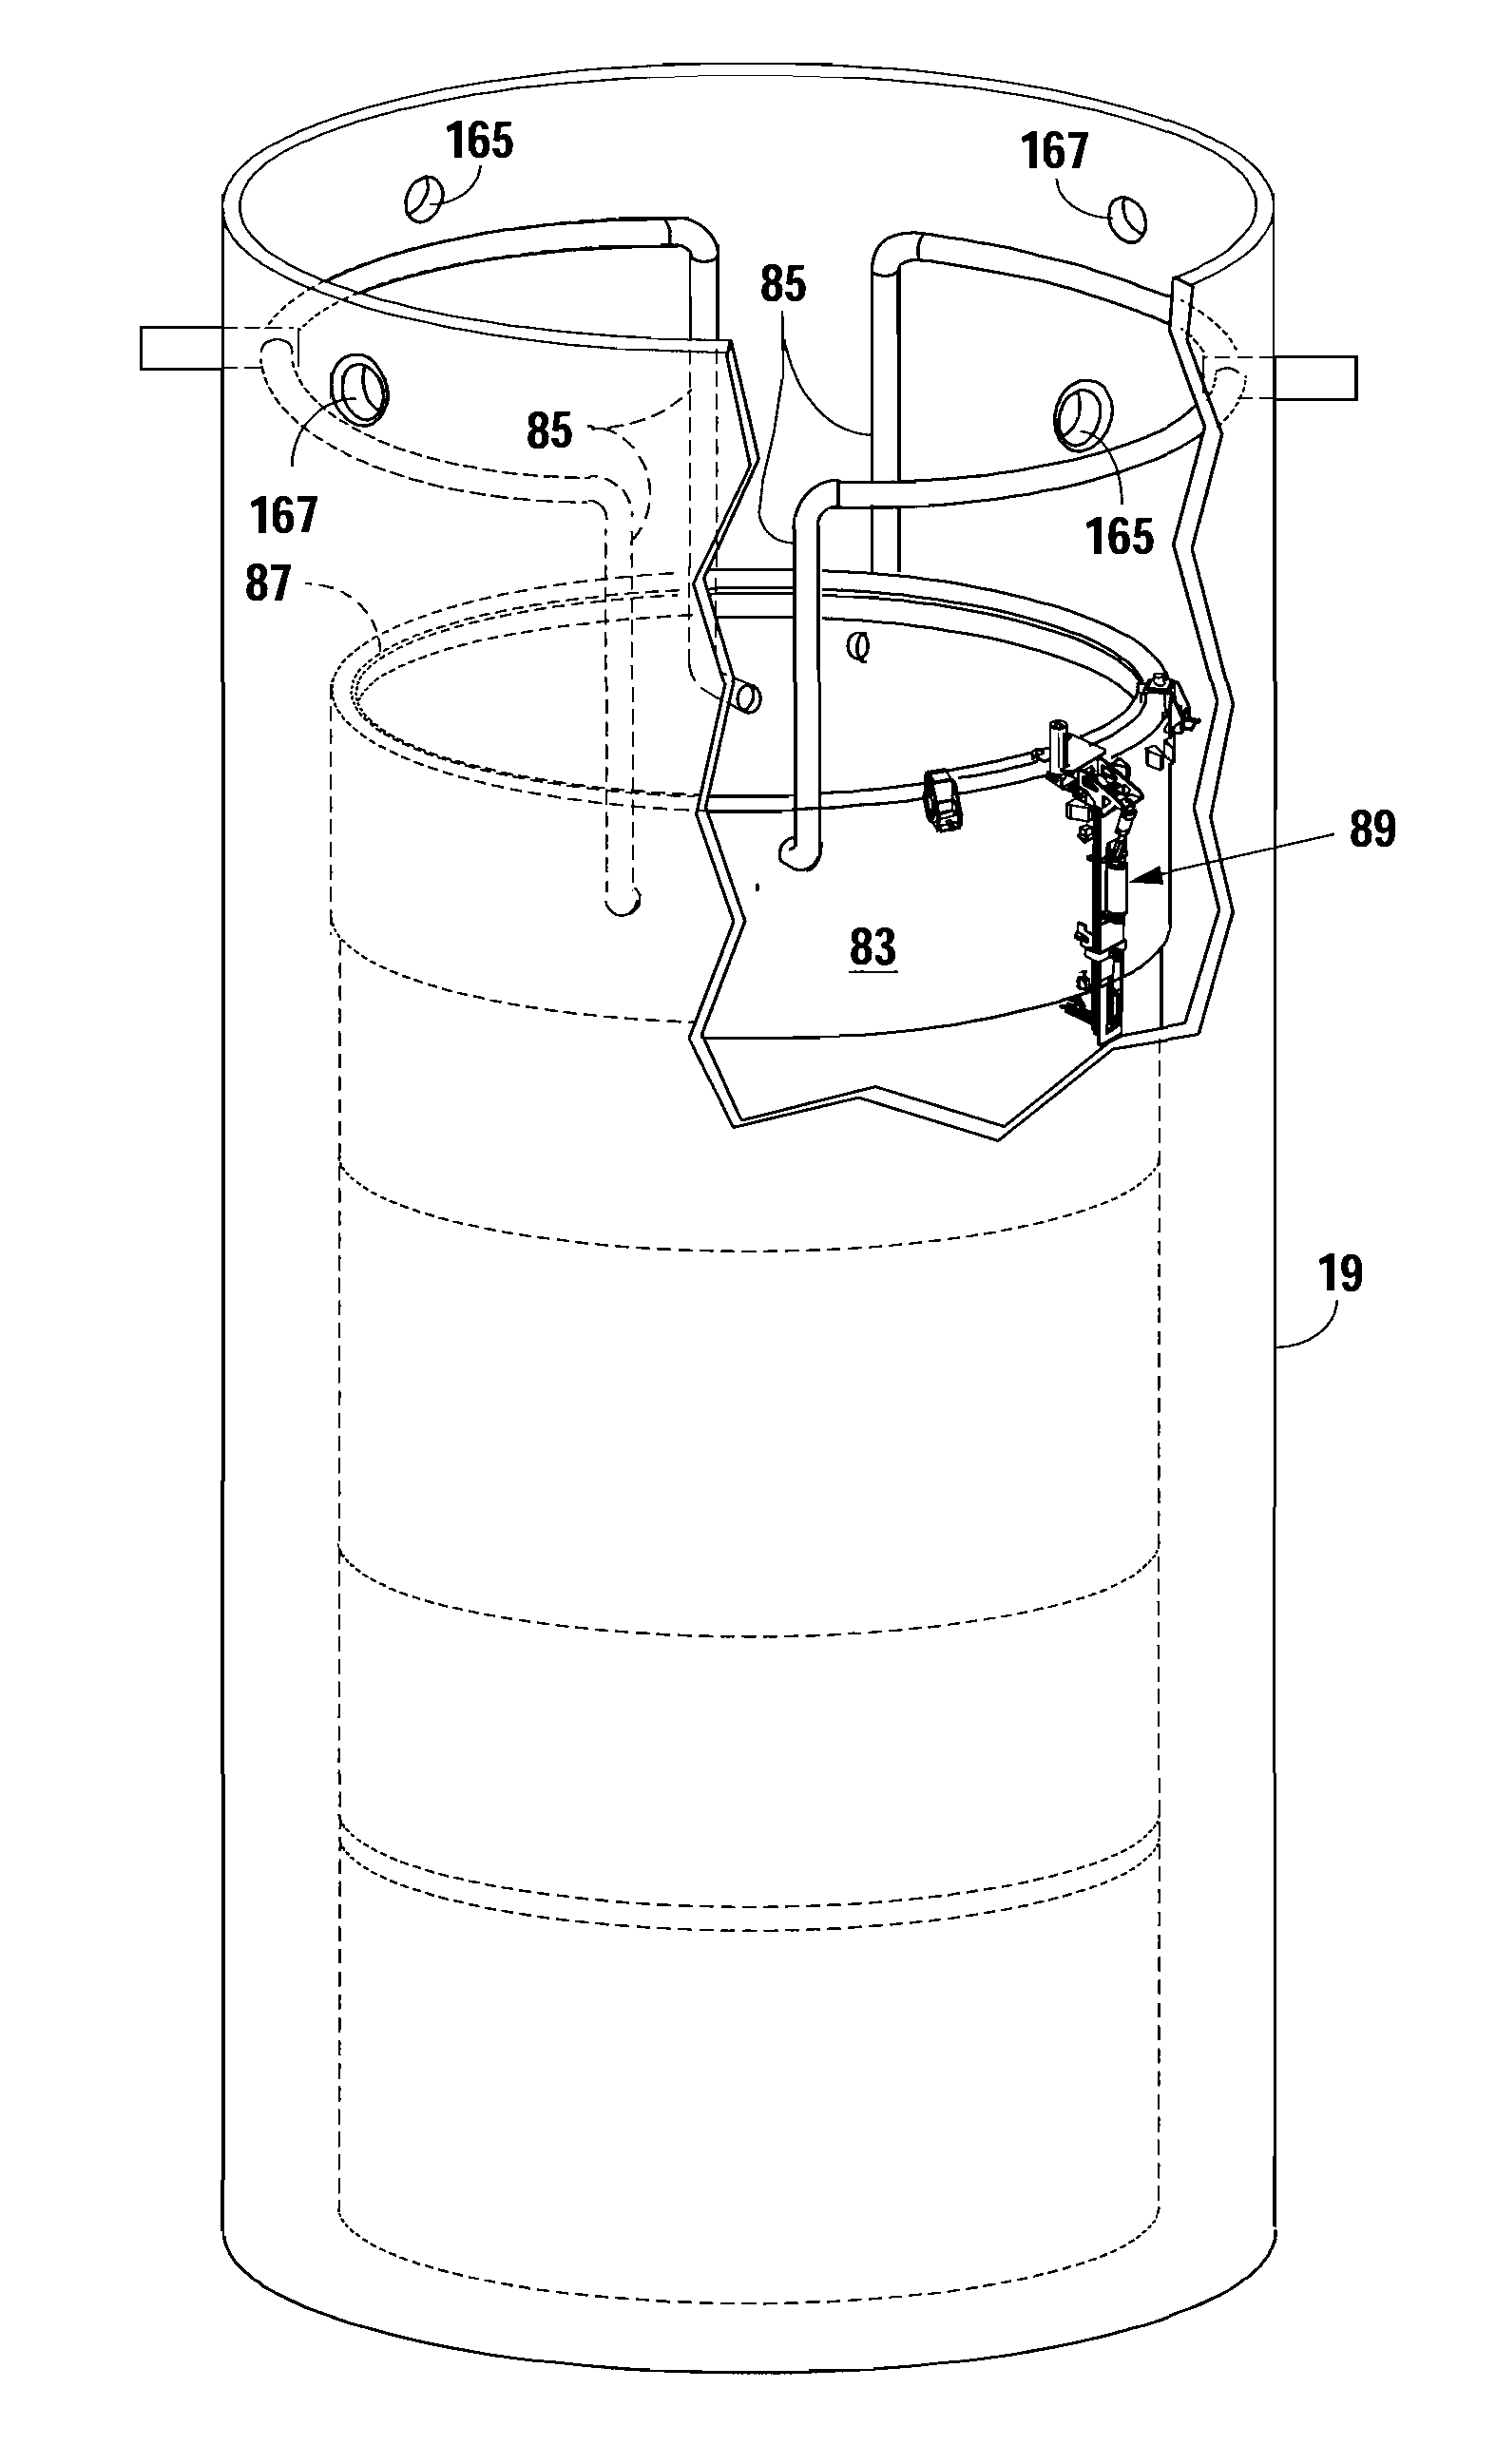 Method and apparatus of inspecting the upper core shroud of a nuclear reactor vessel